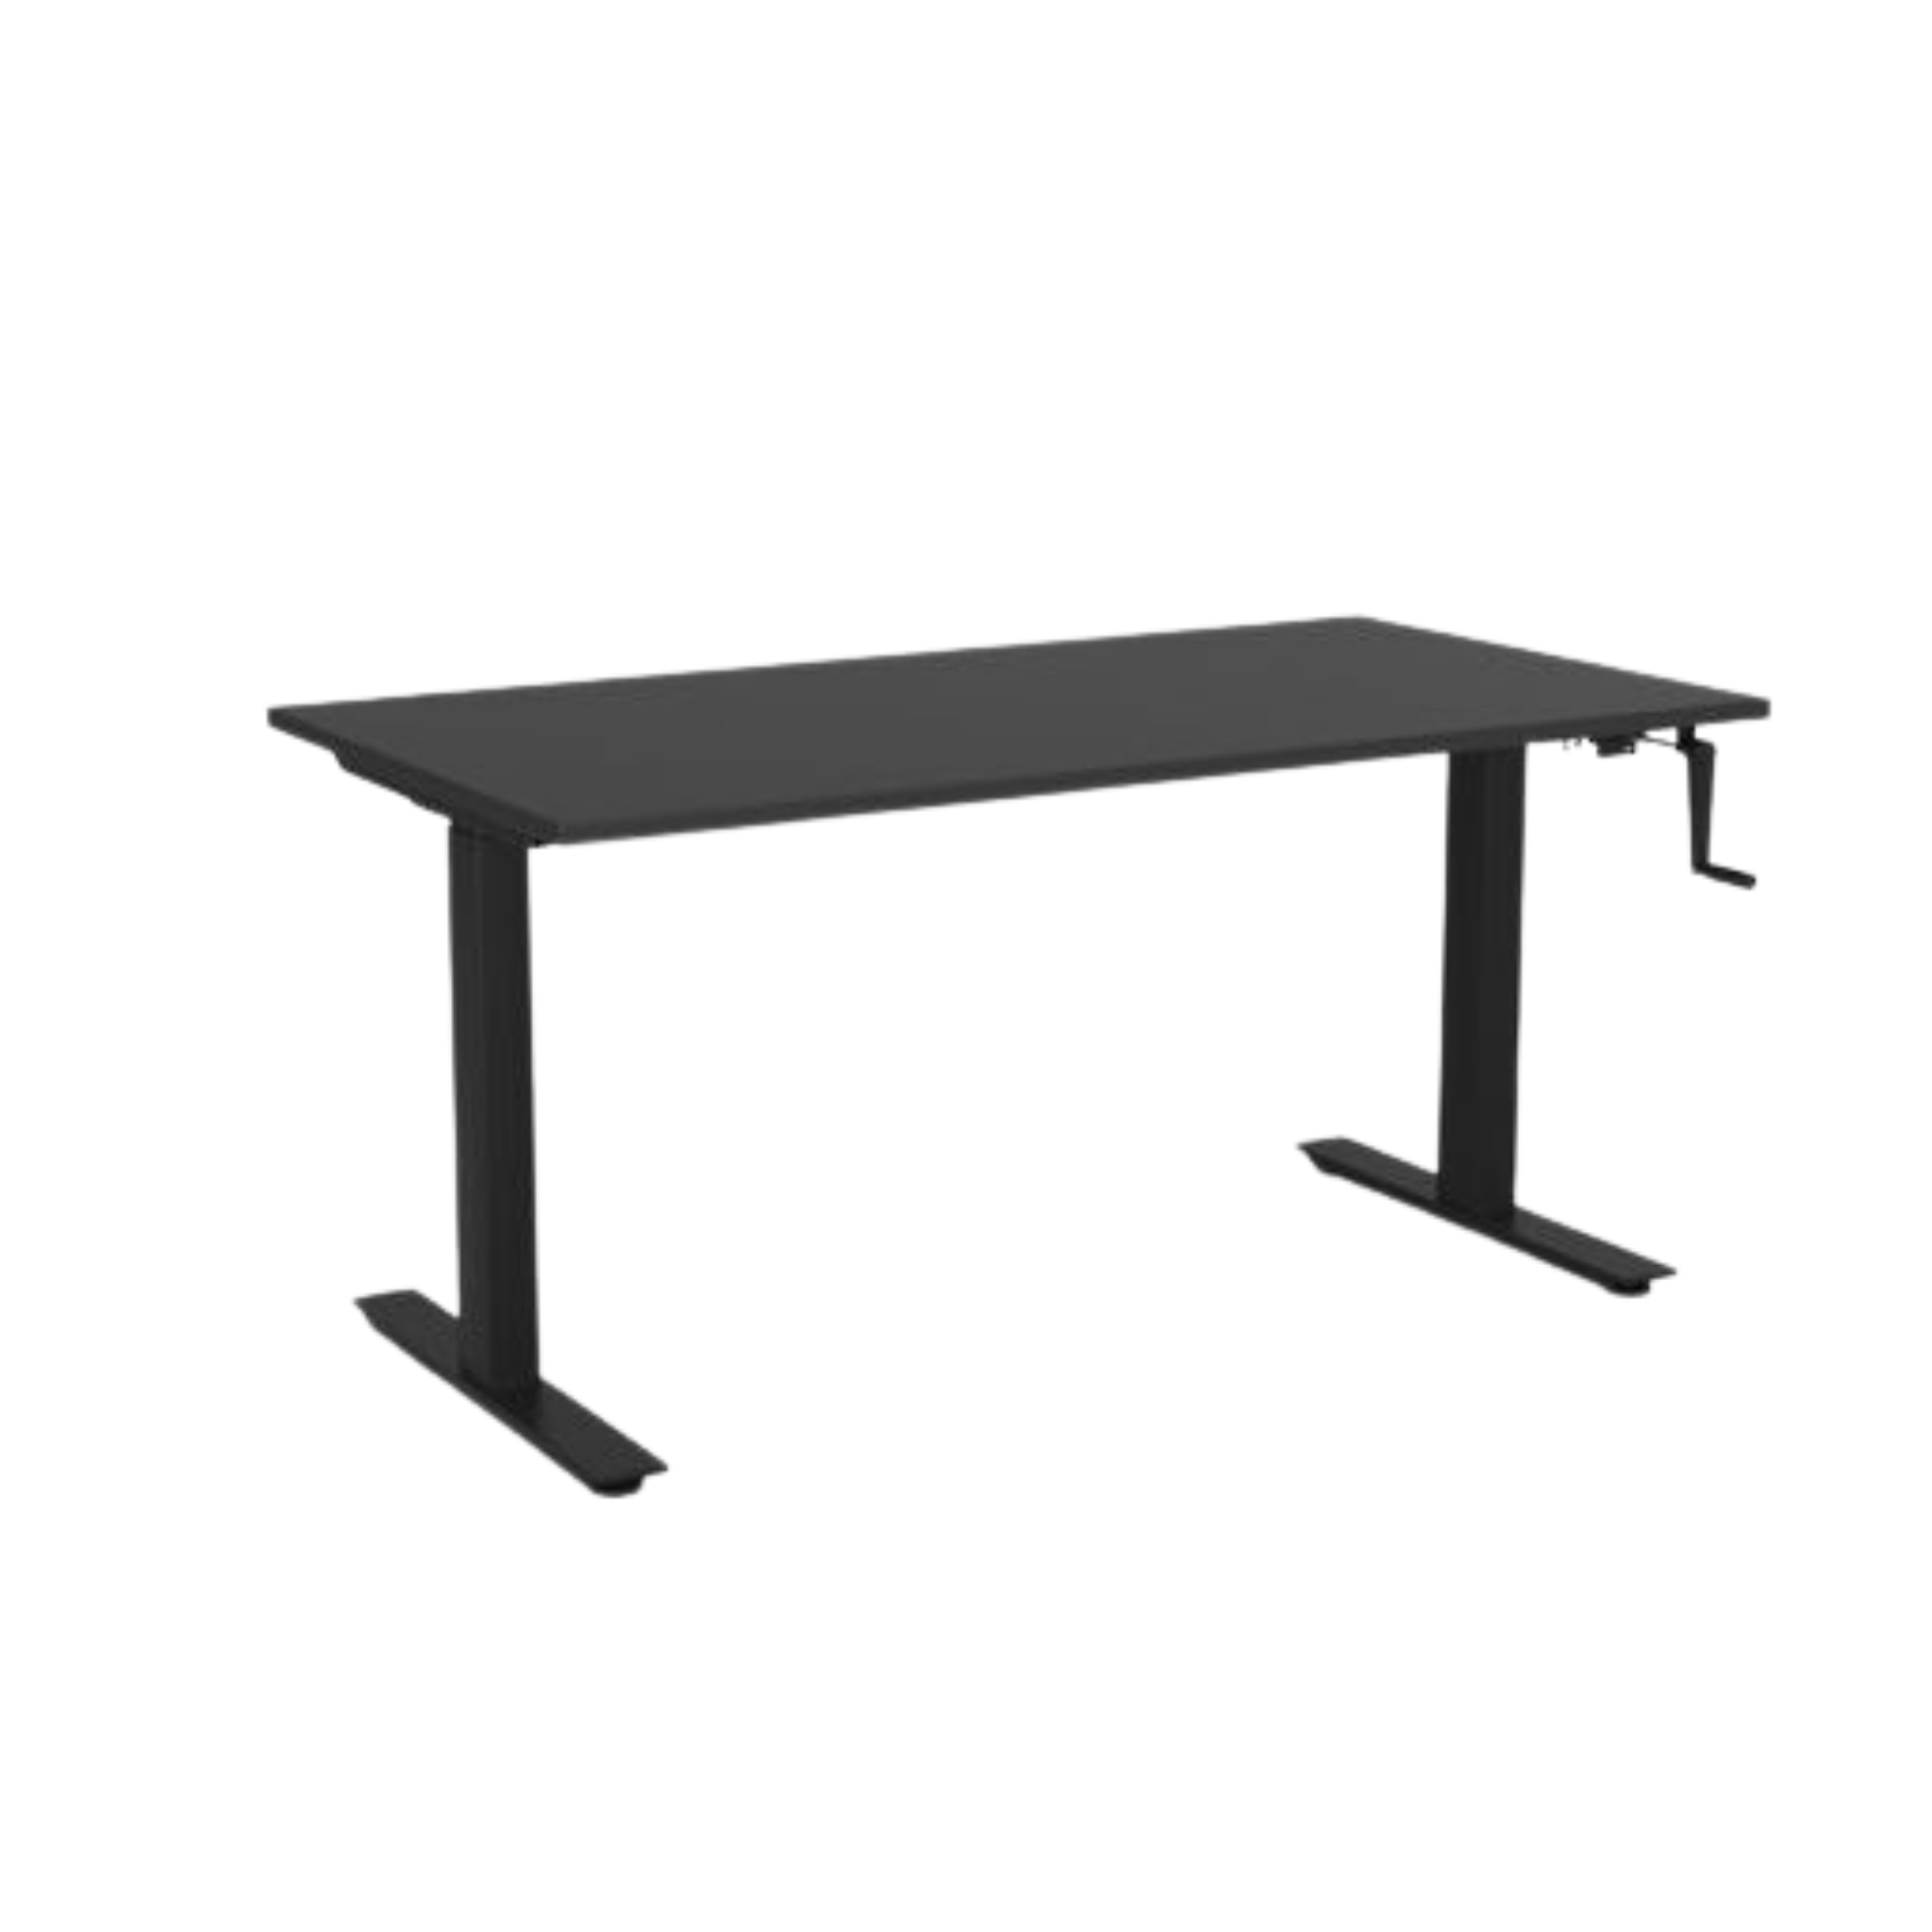 Agile winder sit to stand desk with black frame and black top